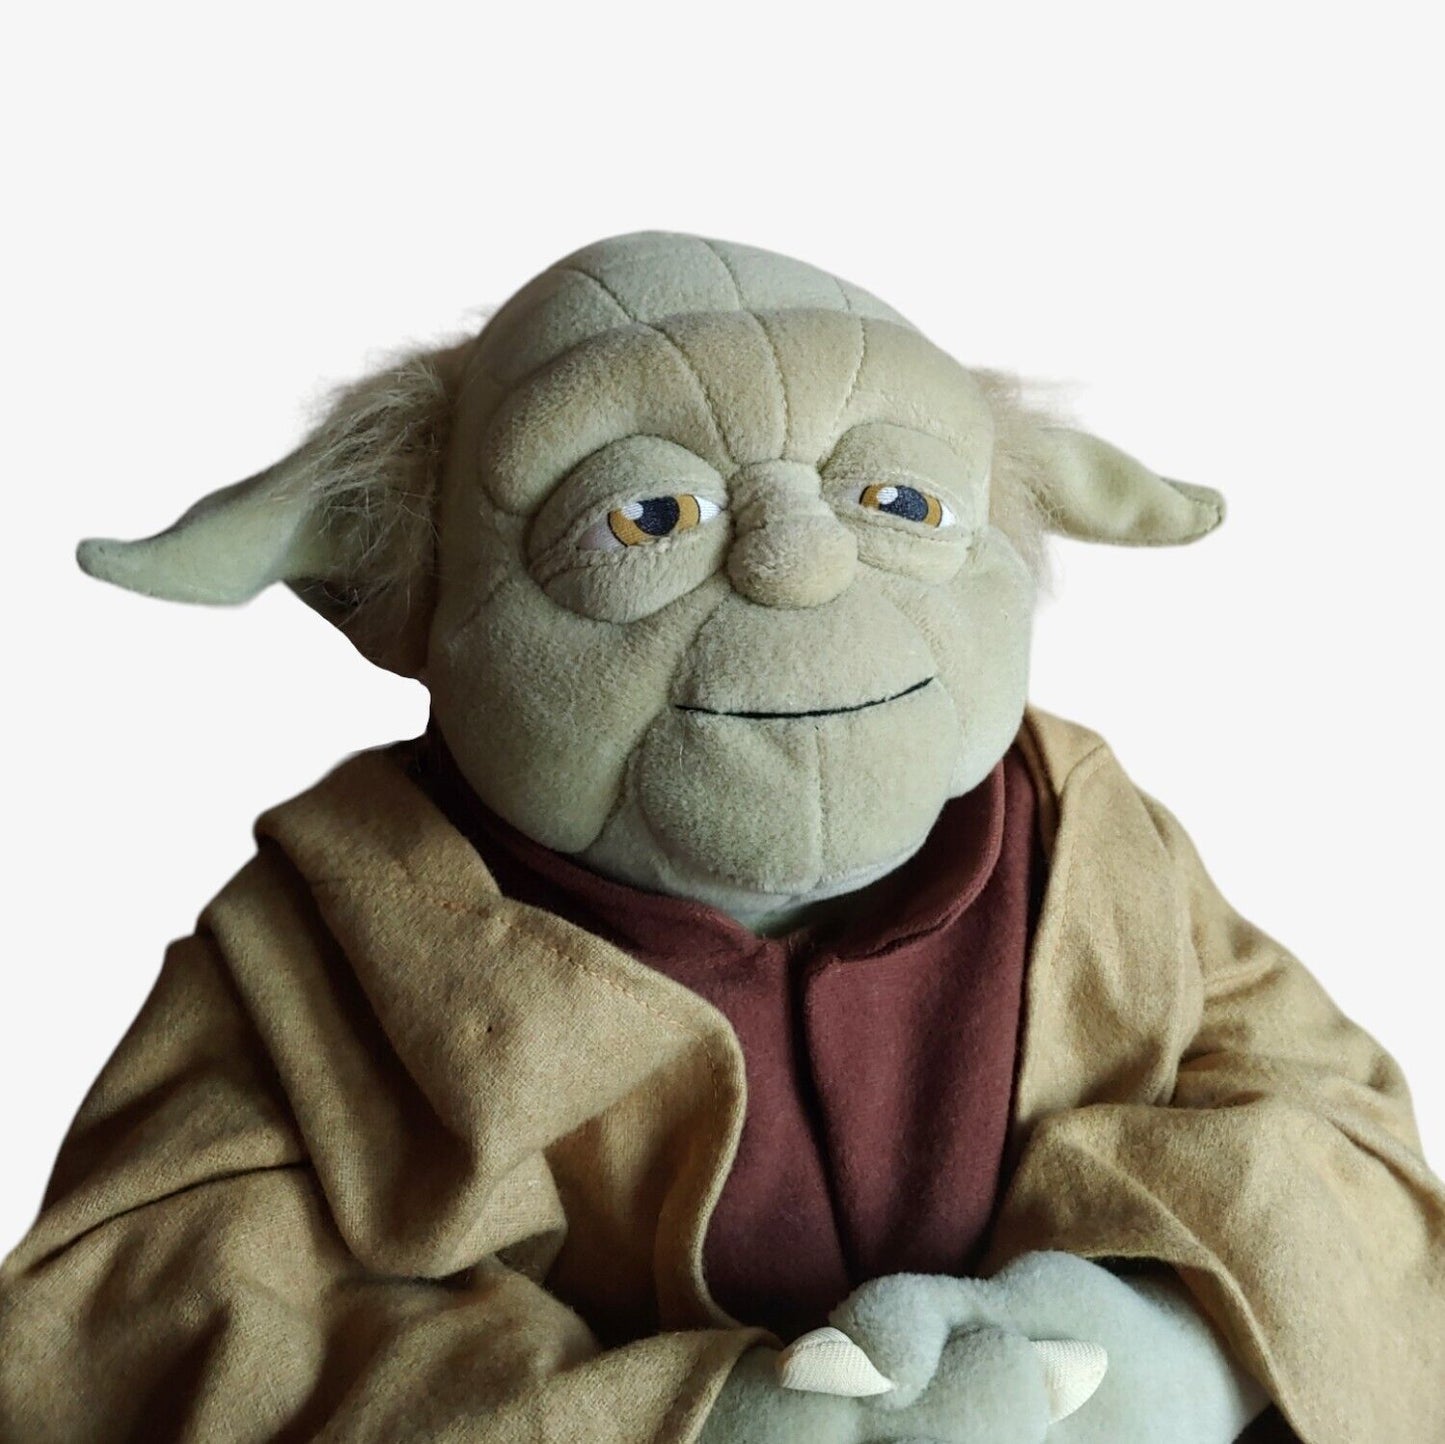 Vintage 2005 Star Wars Episode III Revenge Of The Sith Large Yoda Jedi Soft Toy Face - Casspios Dream